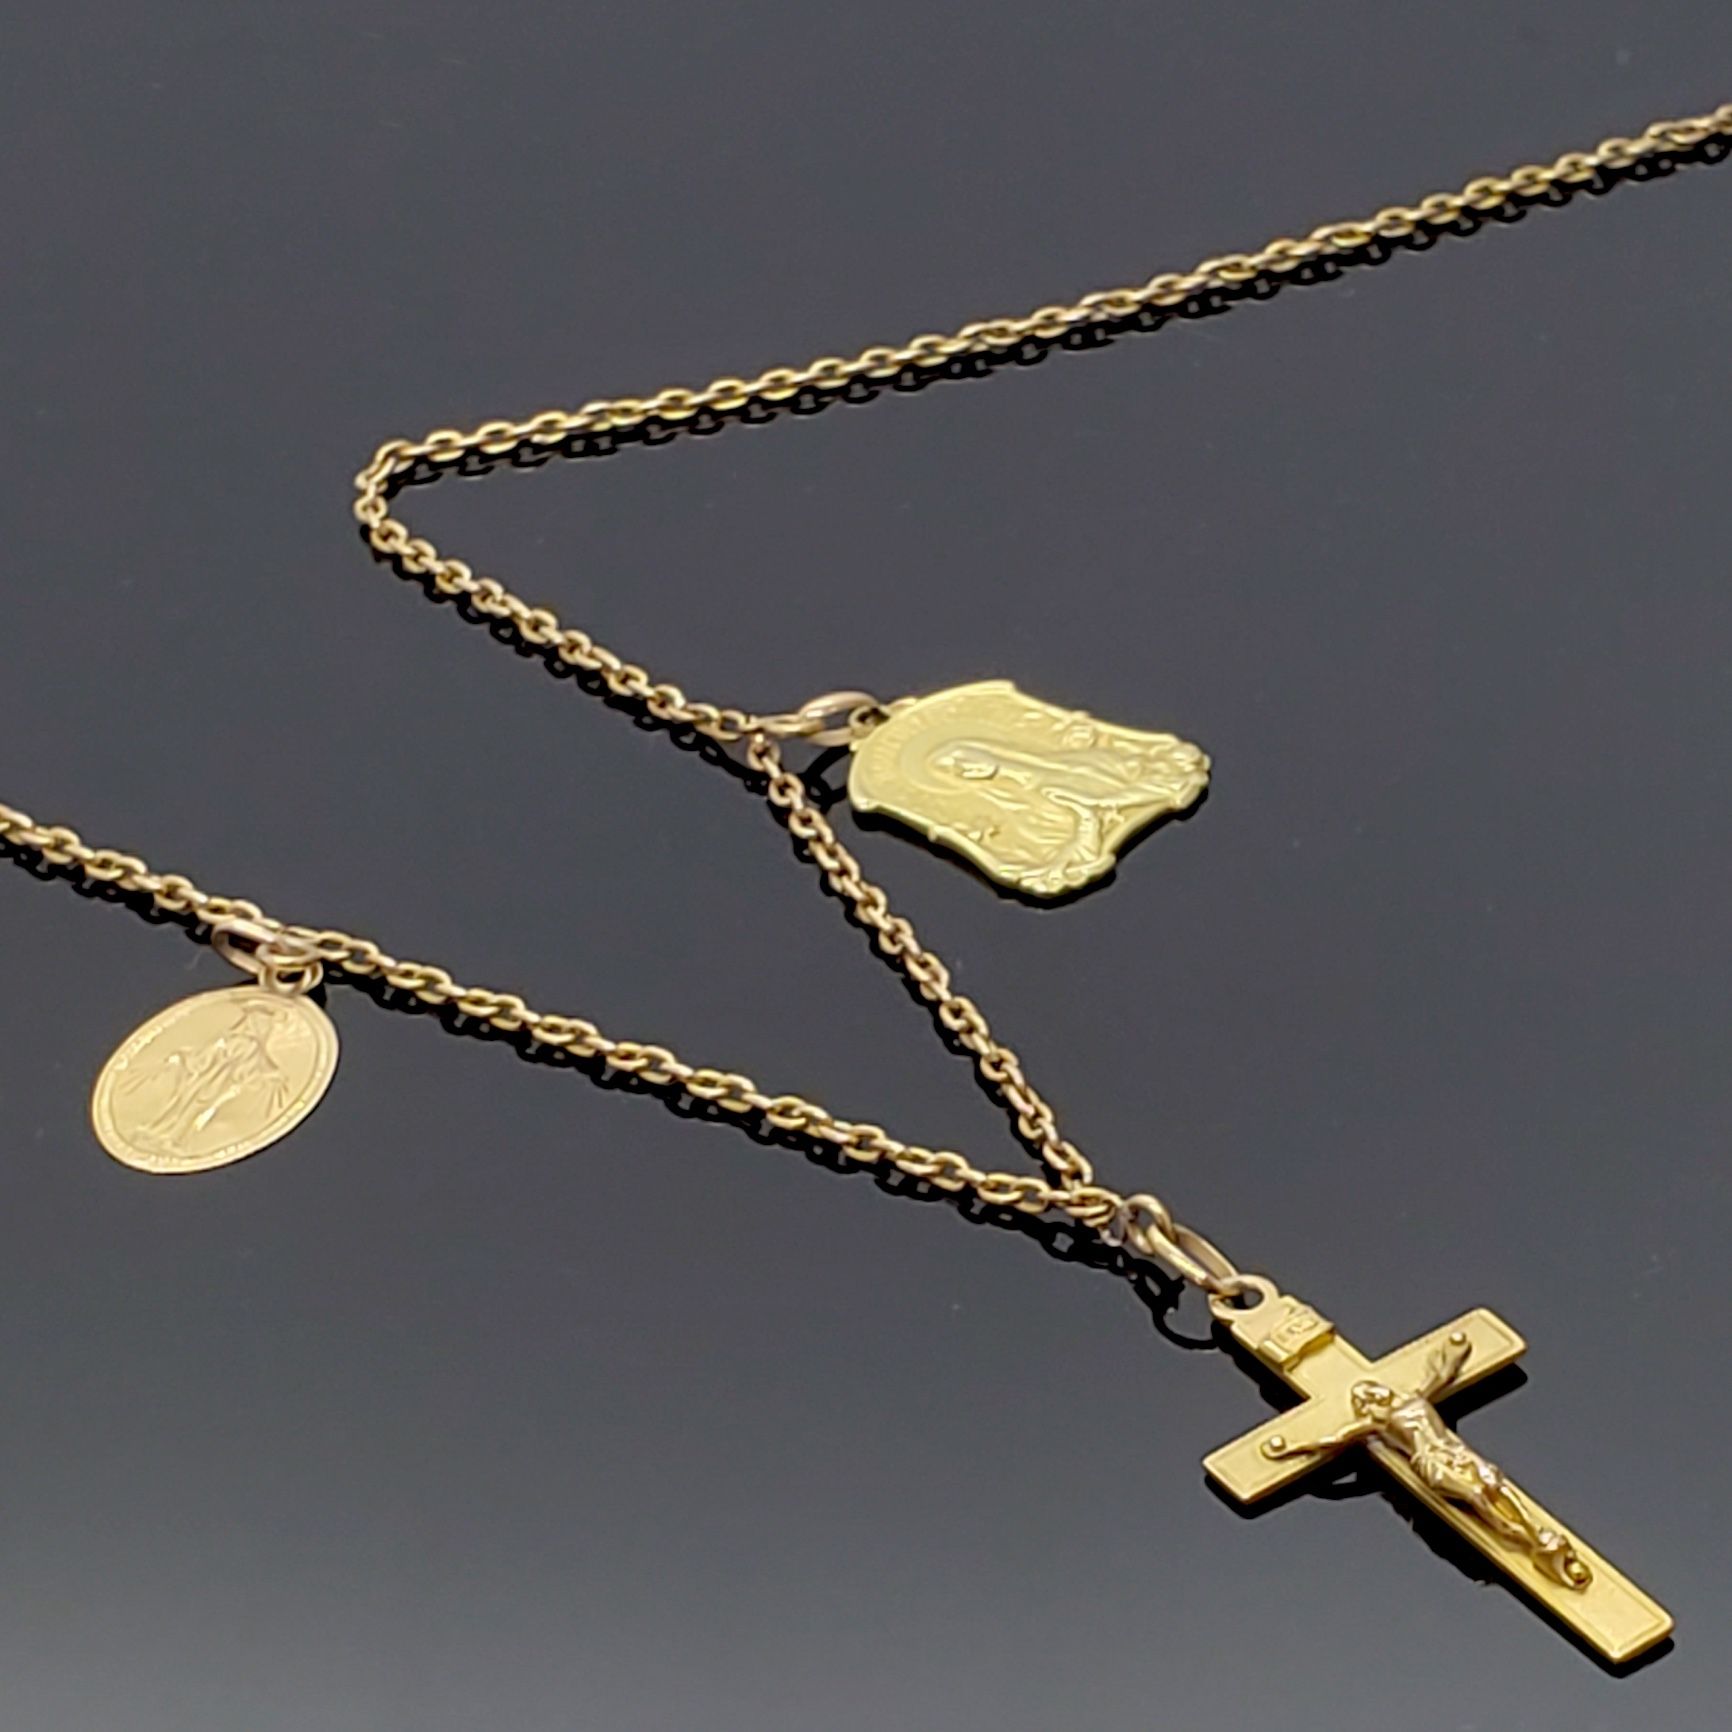 Null CHAIN in pink gold 750 mils, holding two medals and a cross engraved on the&hellip;